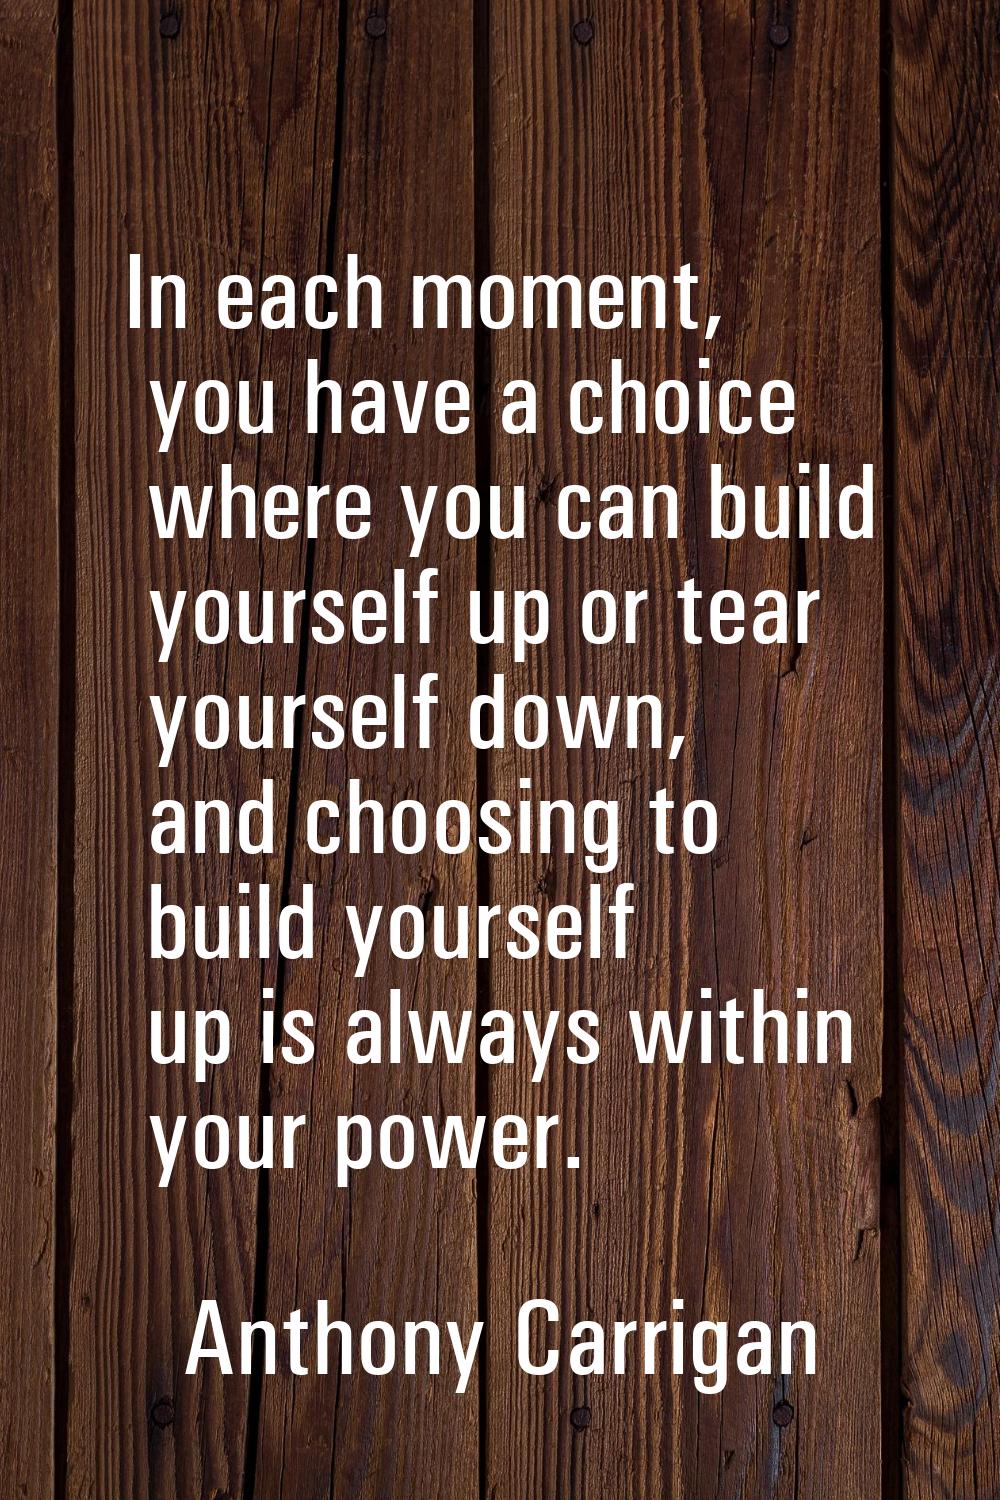 In each moment, you have a choice where you can build yourself up or tear yourself down, and choosi